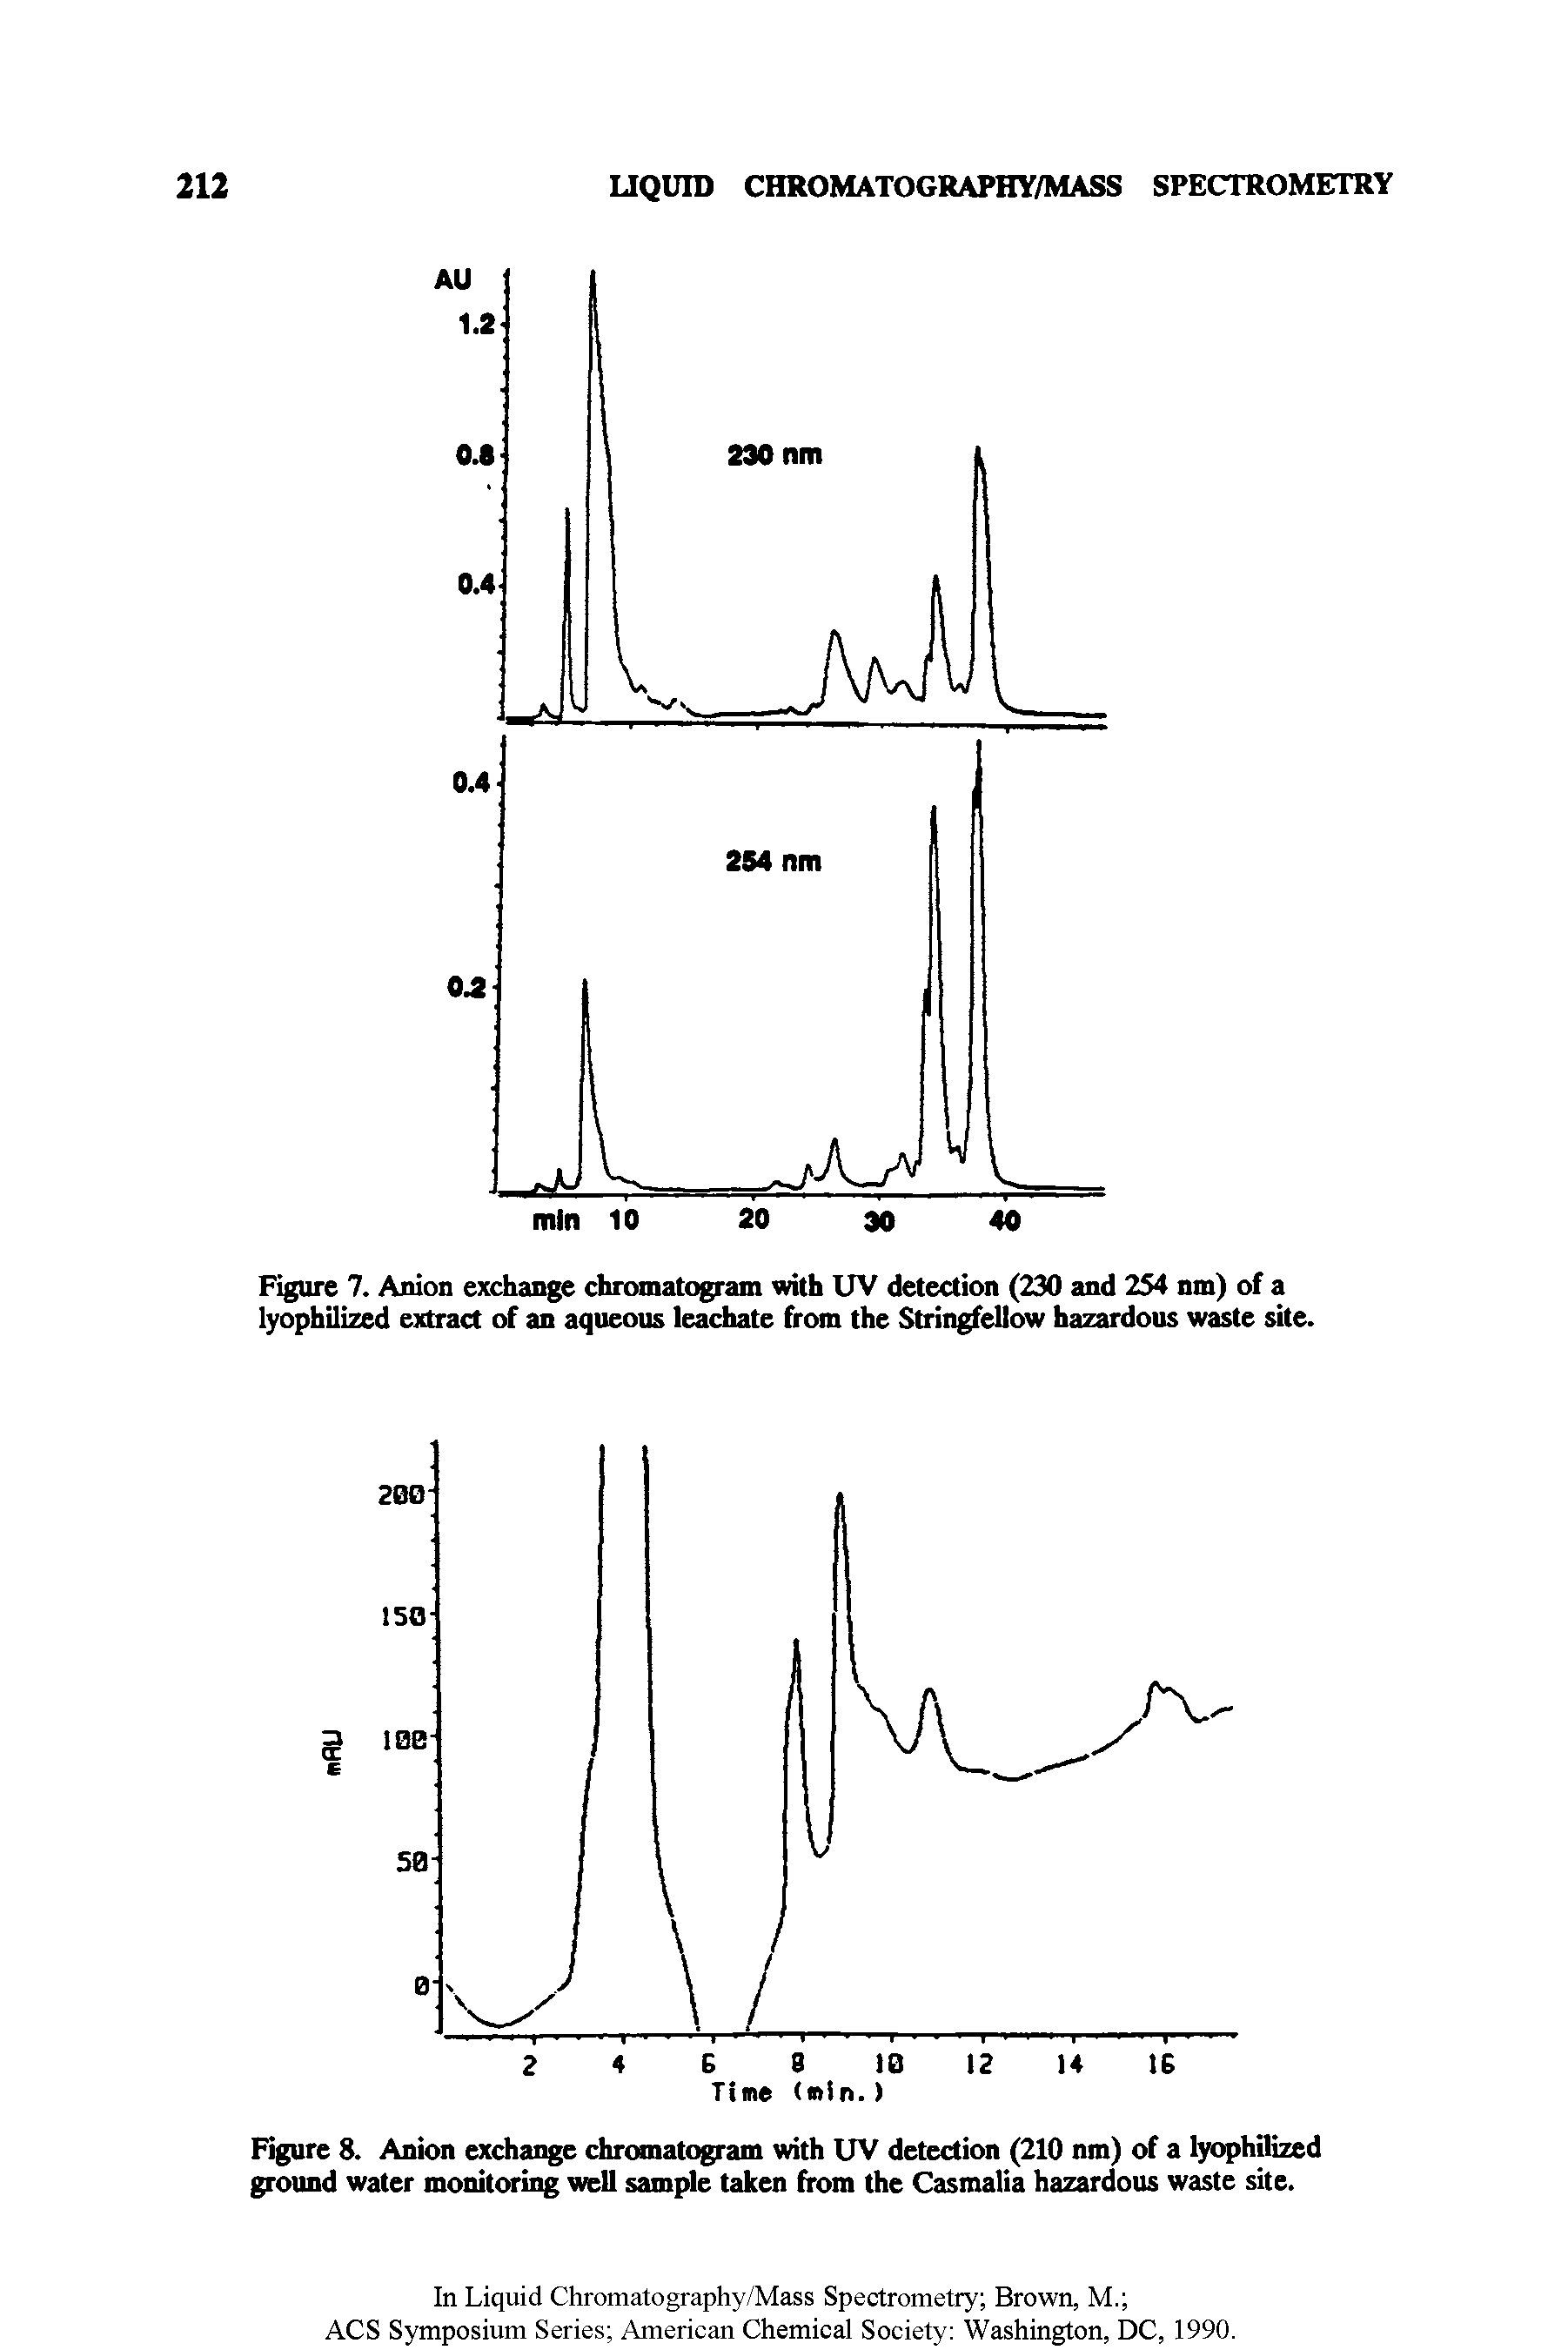 Figure 8. Anion exchange chromatogram with UV detection (210 nm) of a lyophilized ground water monitoring well sample taken from the Casmalia hazardous waste site.